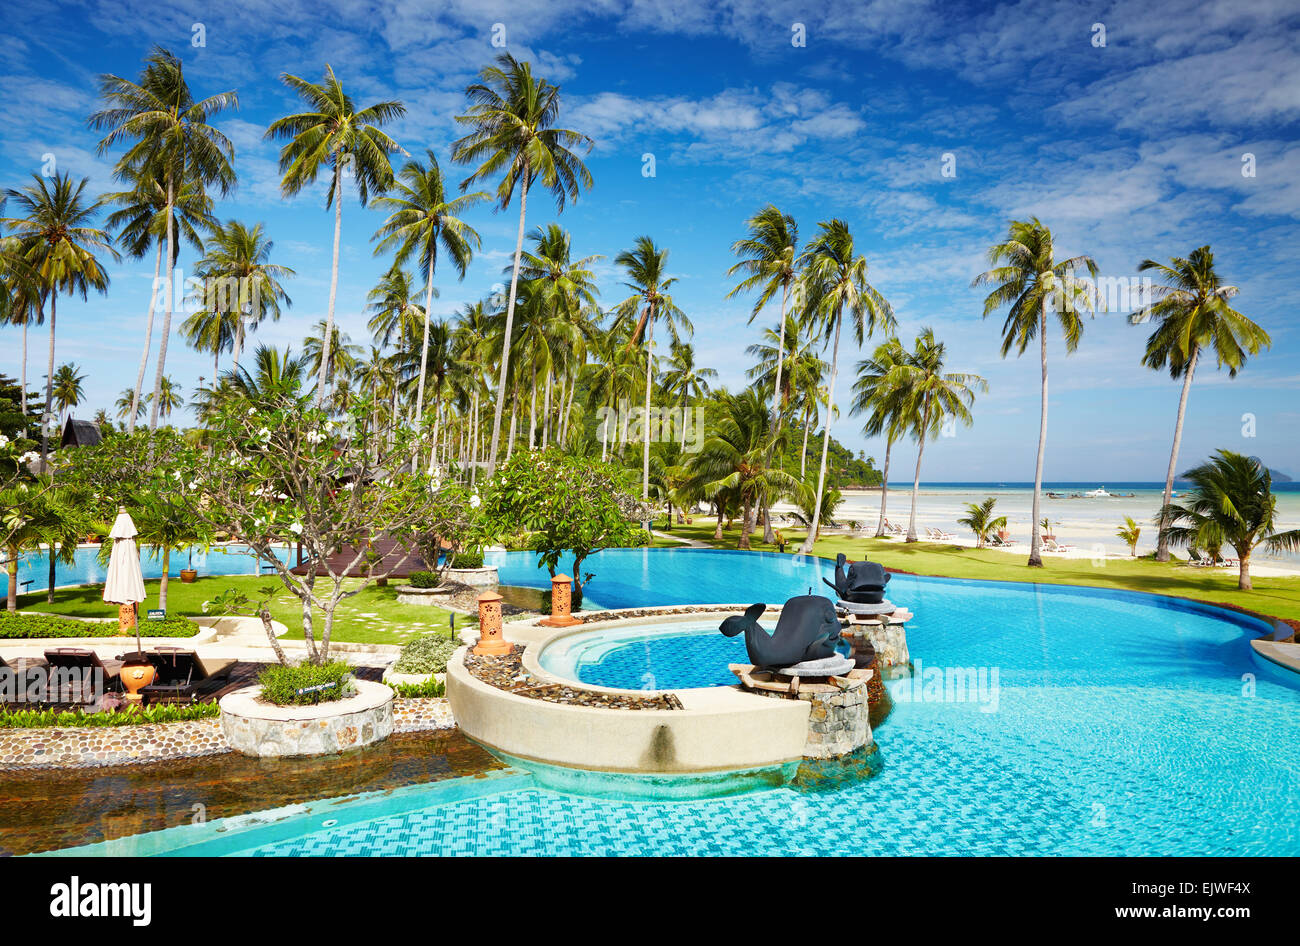 Recreation area with swimming pool on the tropical beach Stock Photo